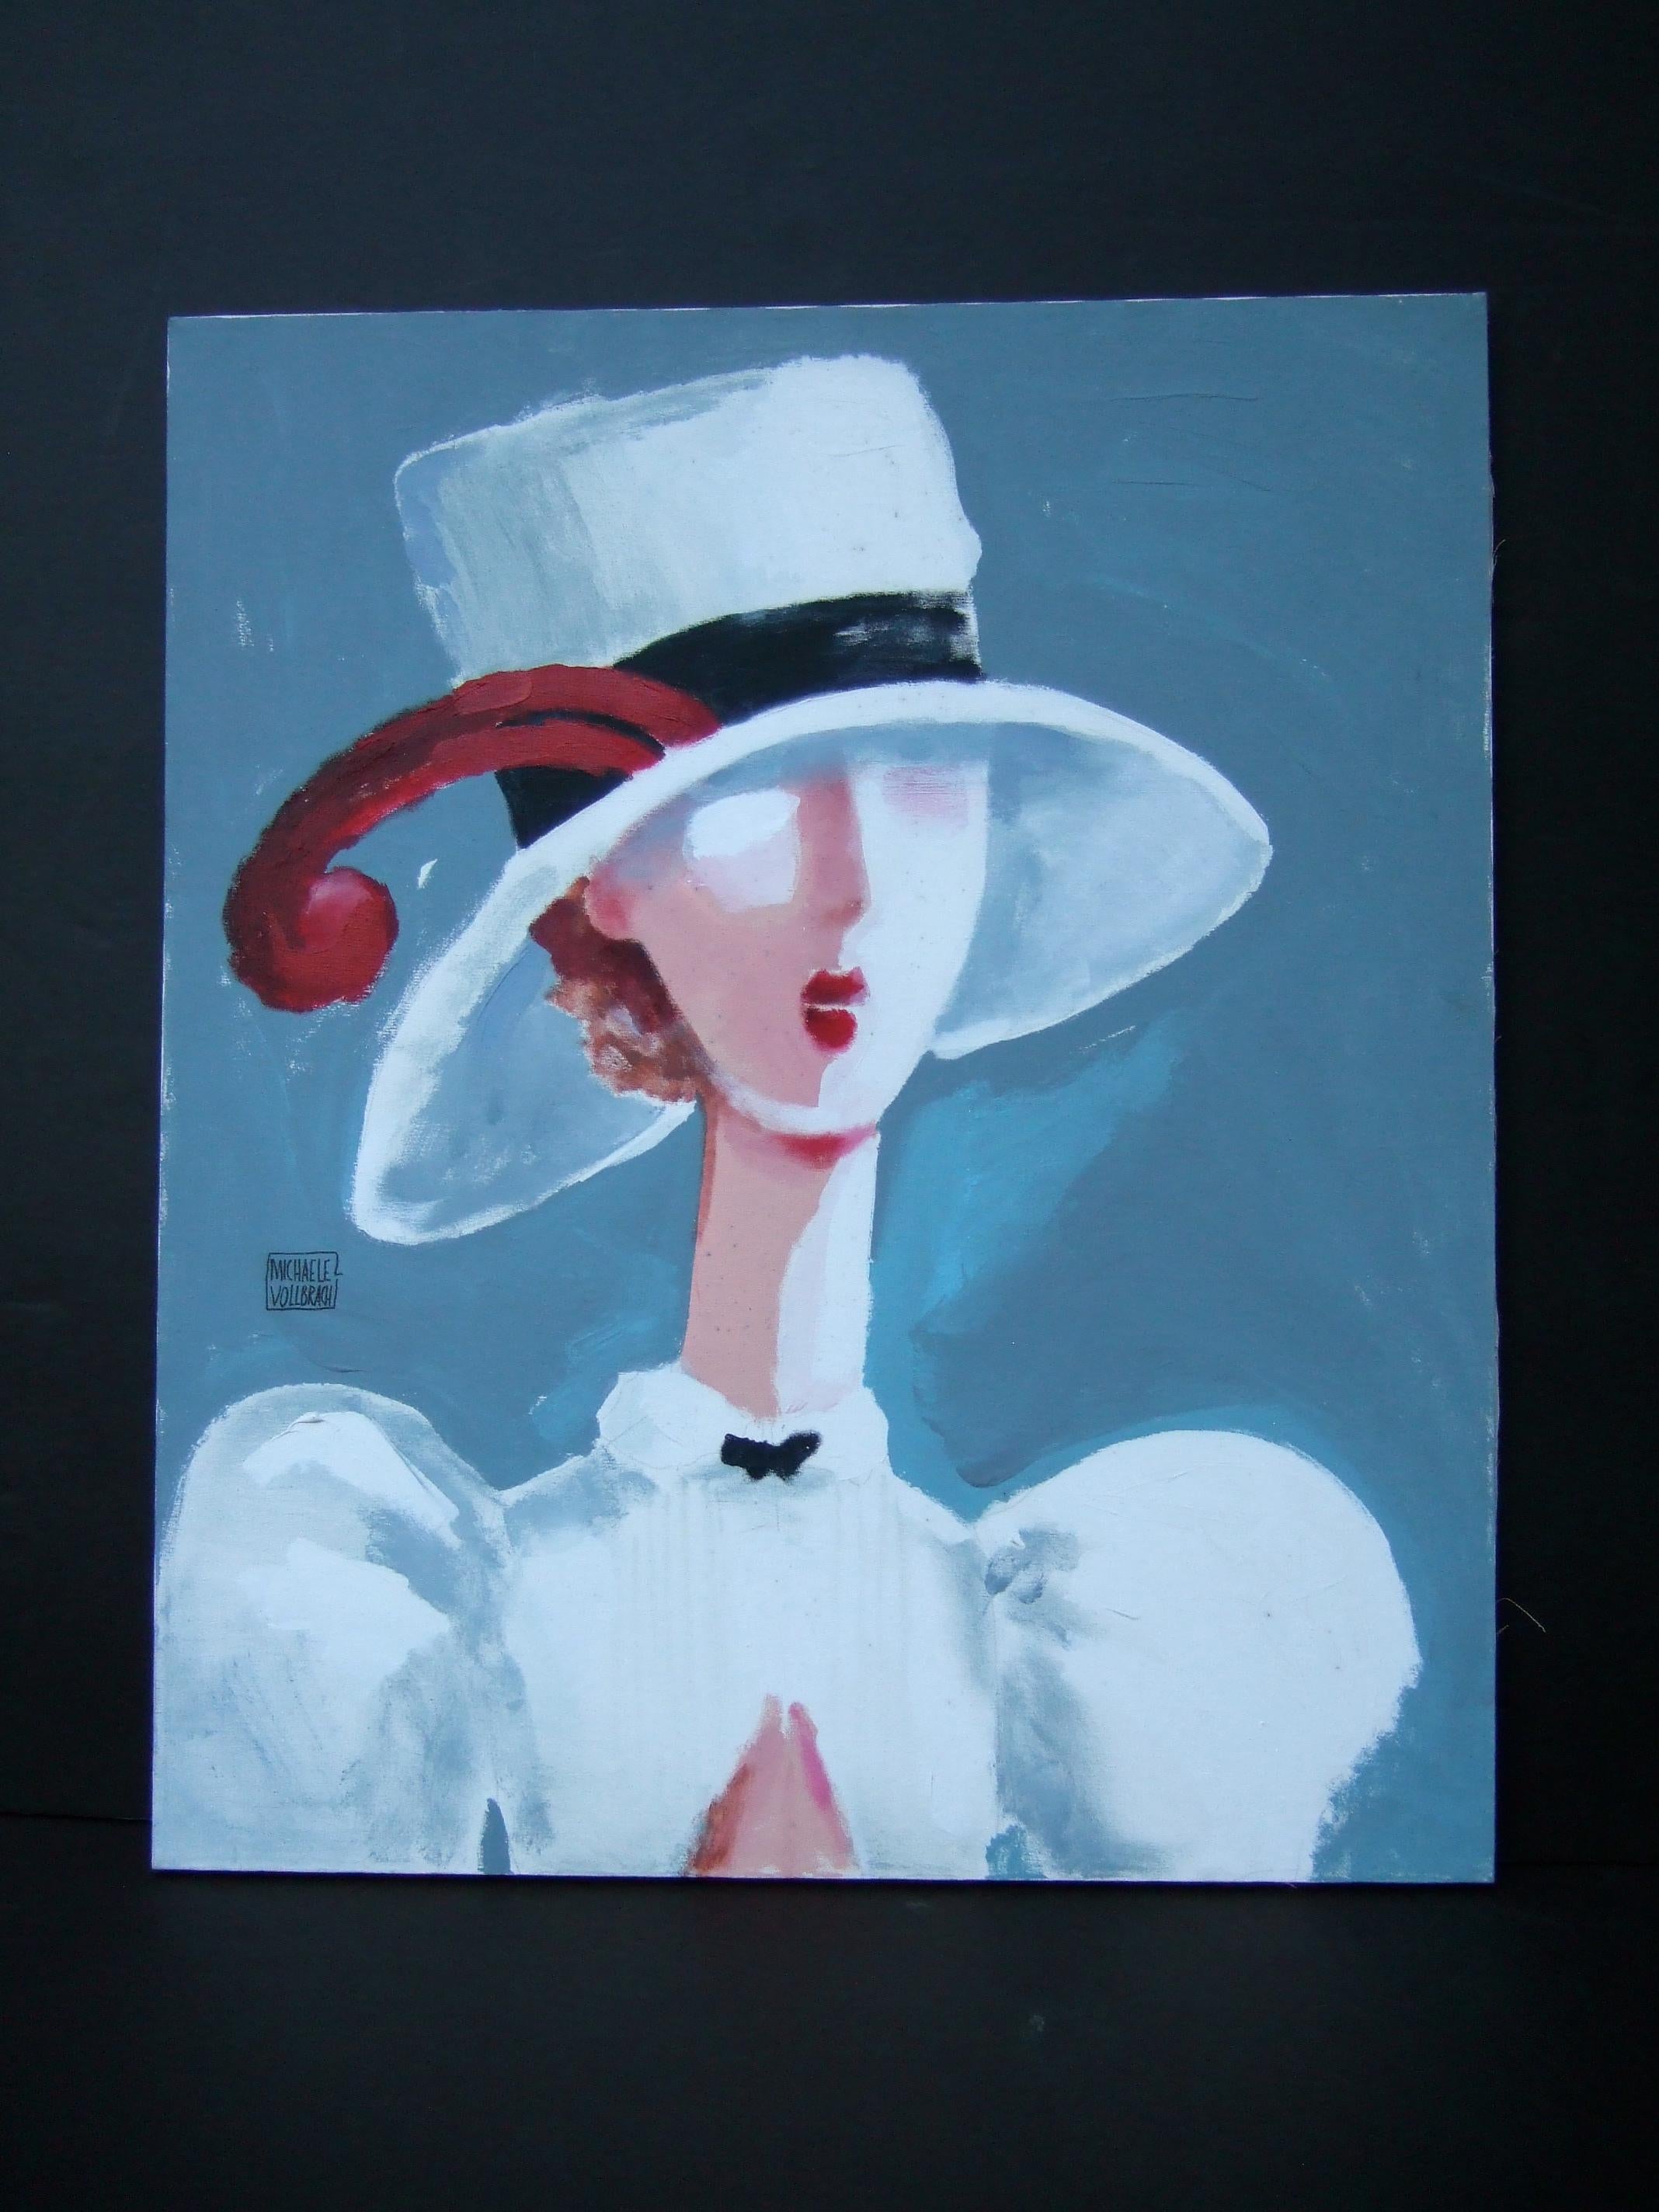 Michaele Vollbracht Rare elegant stylized woman oil painting c 1980s w 30 x 35.75 h 
The bold painting is illuminated with a chic woman in a dramatic hat
Her crisp white attire is set against a muted gray-blue background 

Vollbracht's talents and